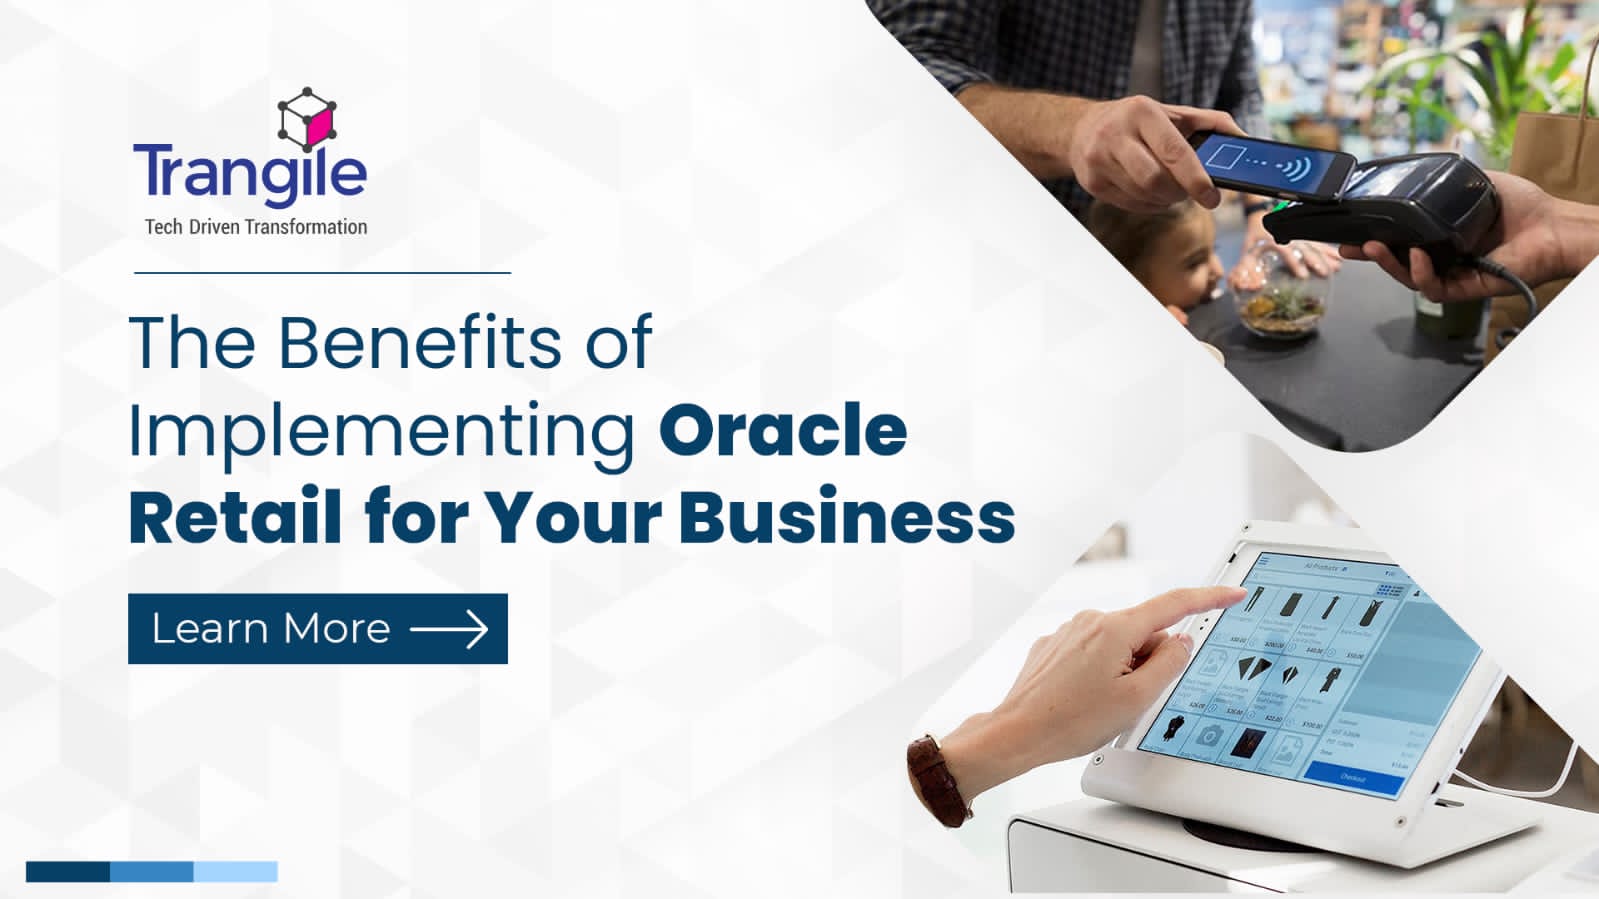 The benefits of implementing Oracle Retail for your business